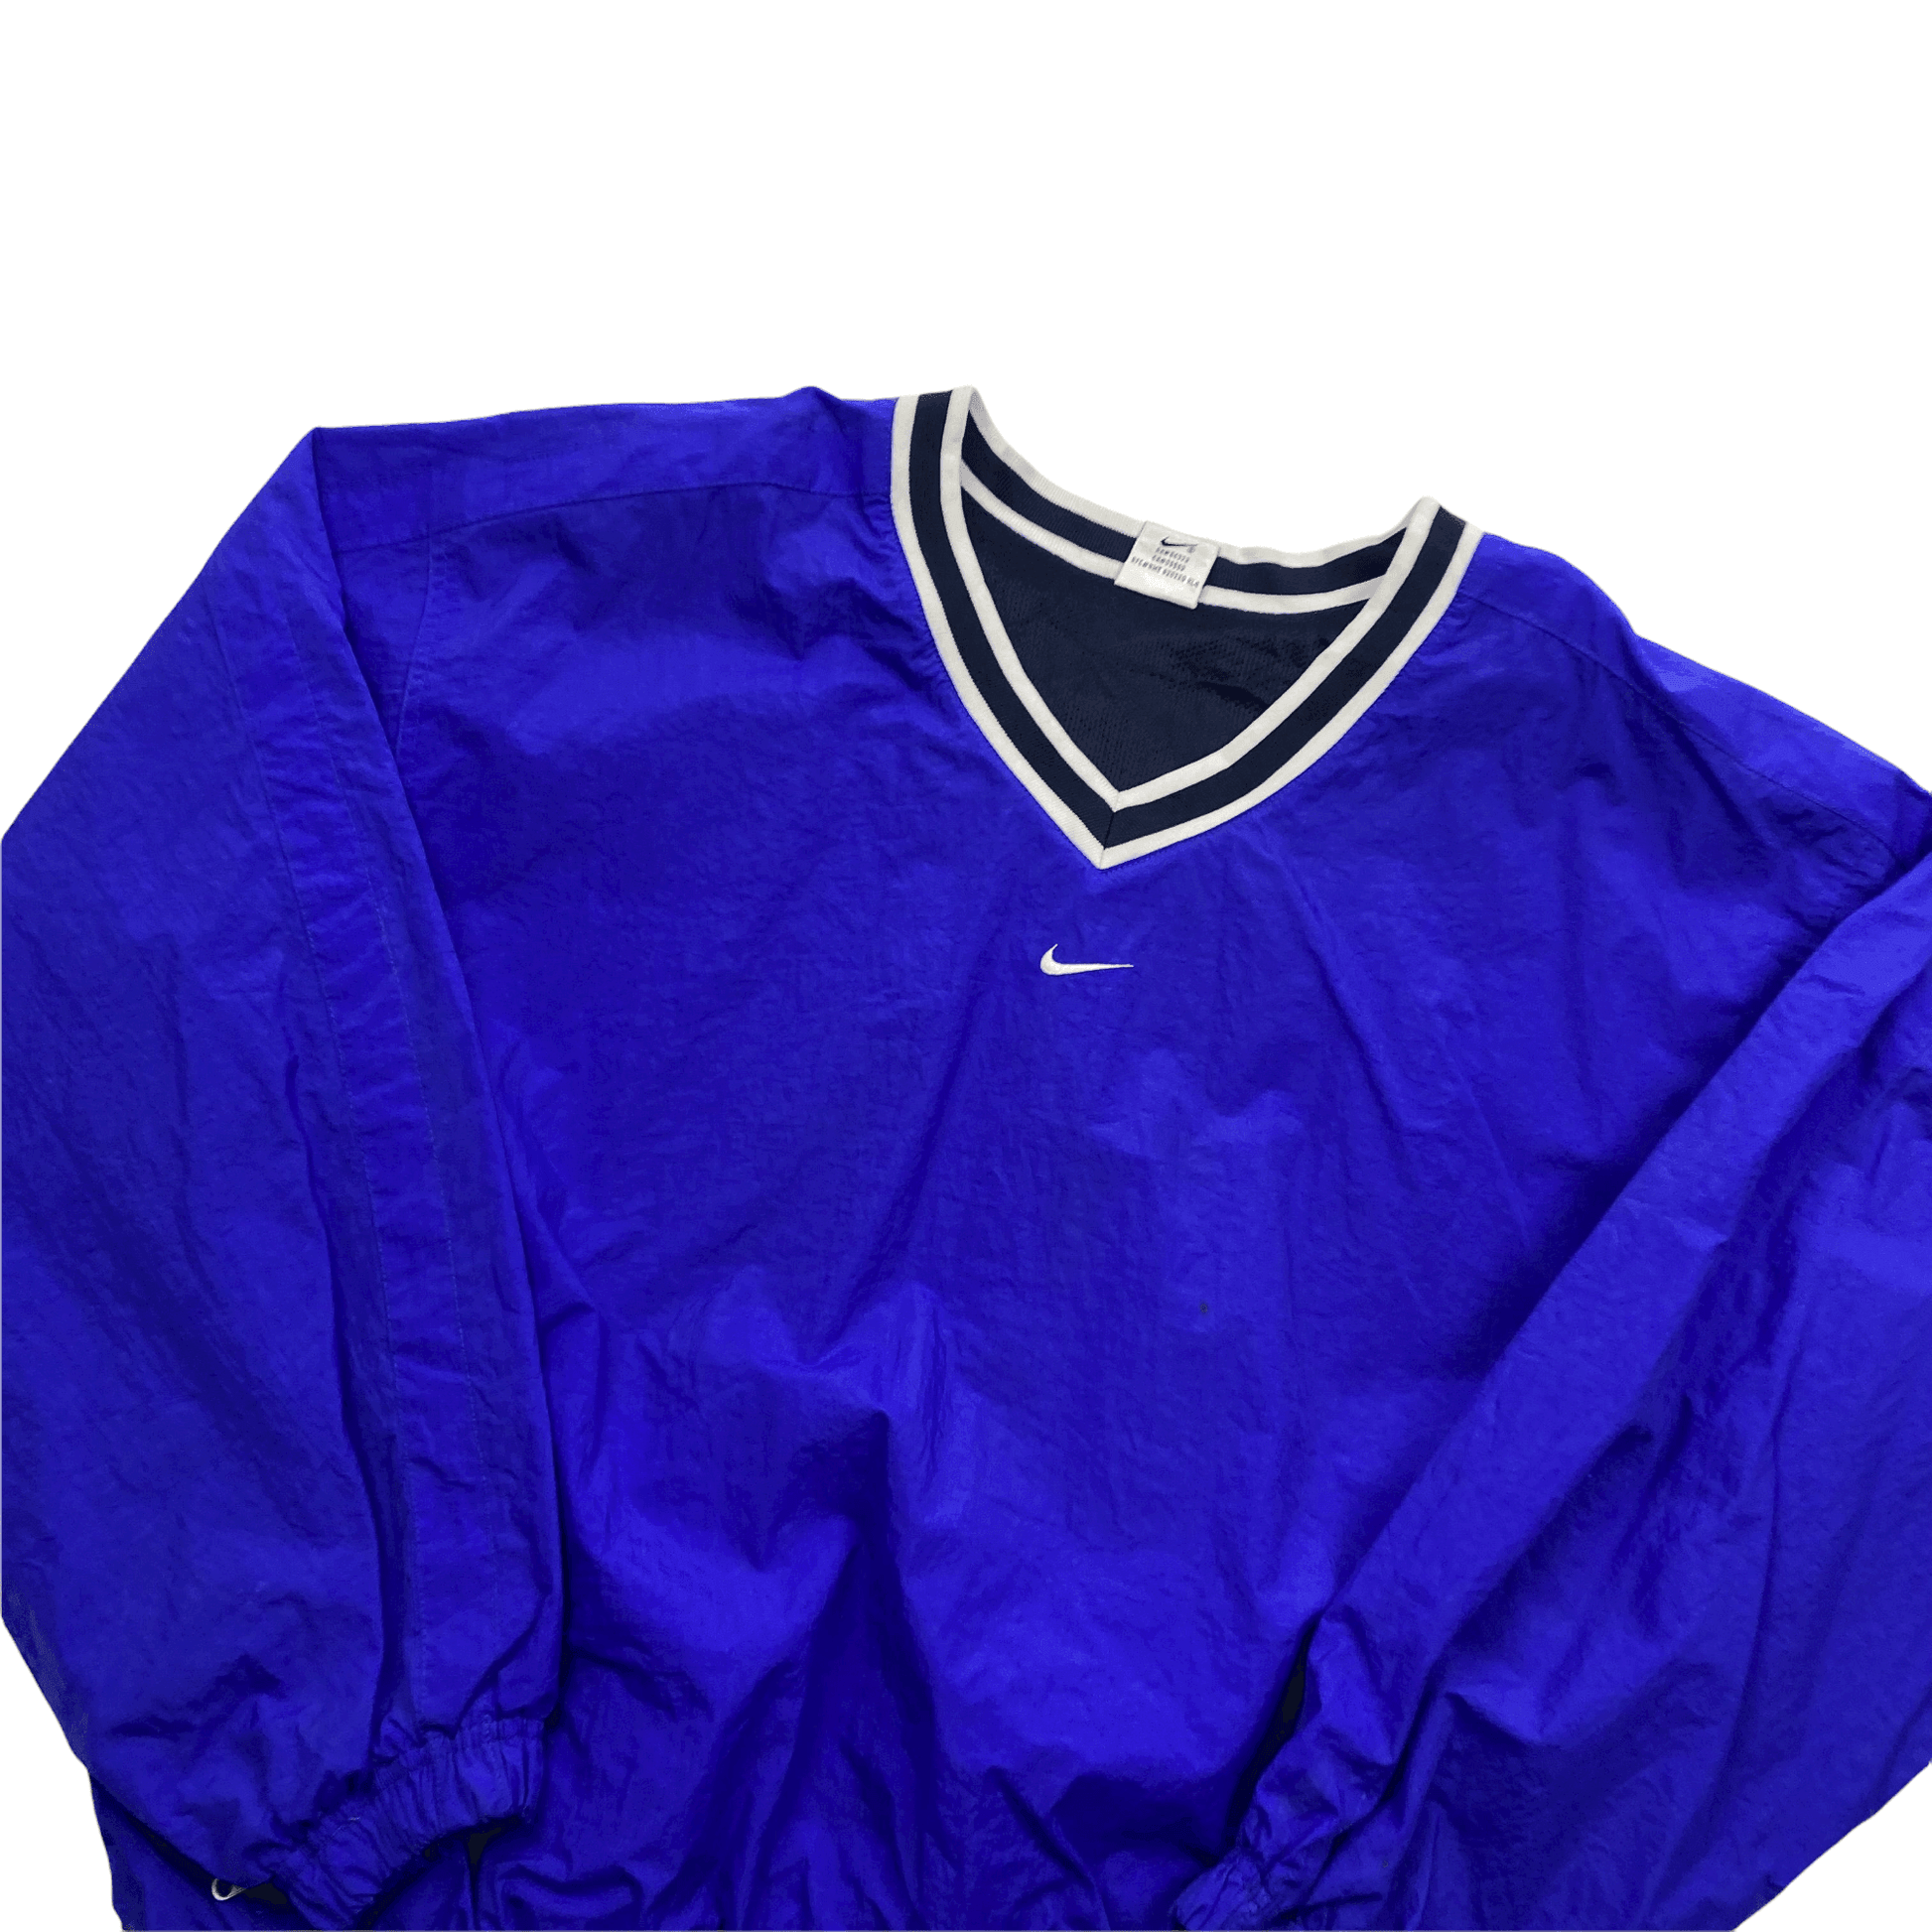 Vintage 90s Blue Nike Waterproof Centre Logo Training Top - Recommended Size - Medium - The Streetwear Studio